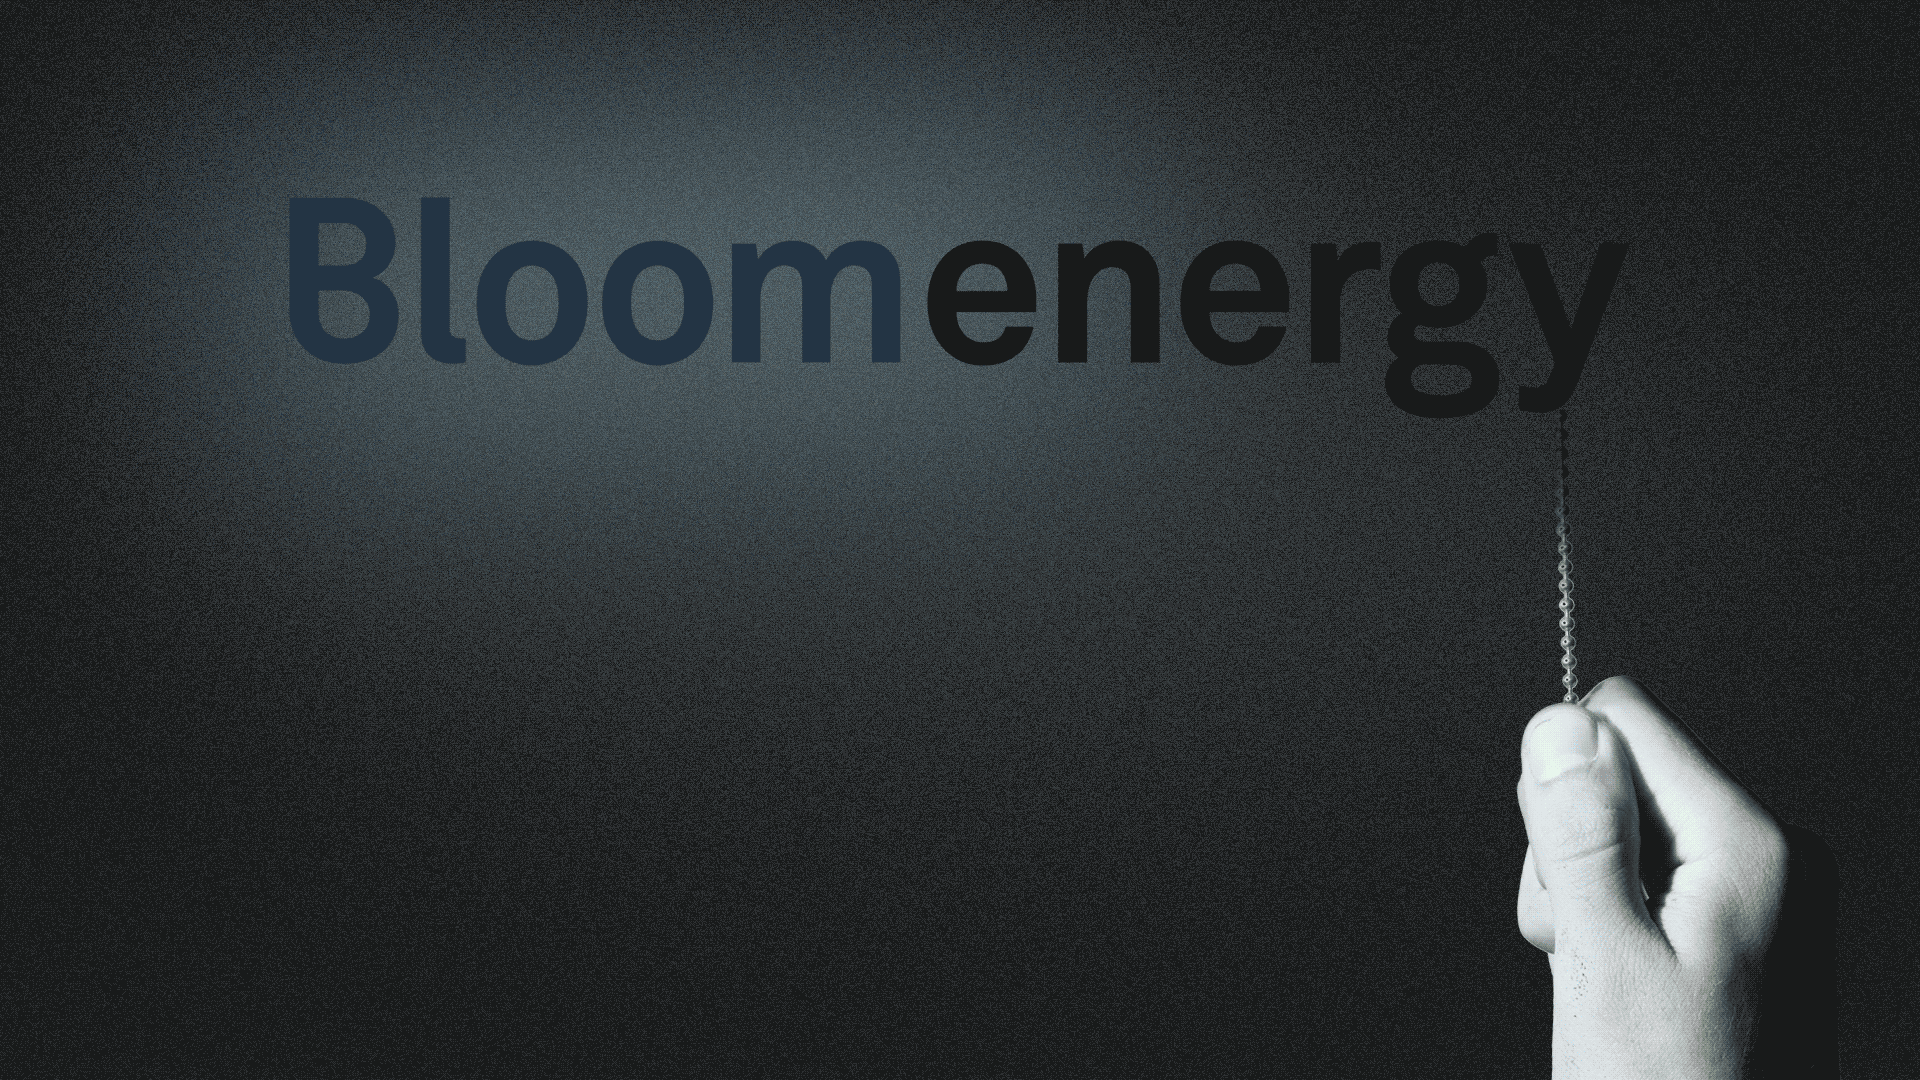 Animated GIF of the Bloomenergy logo being turned off by a hand.